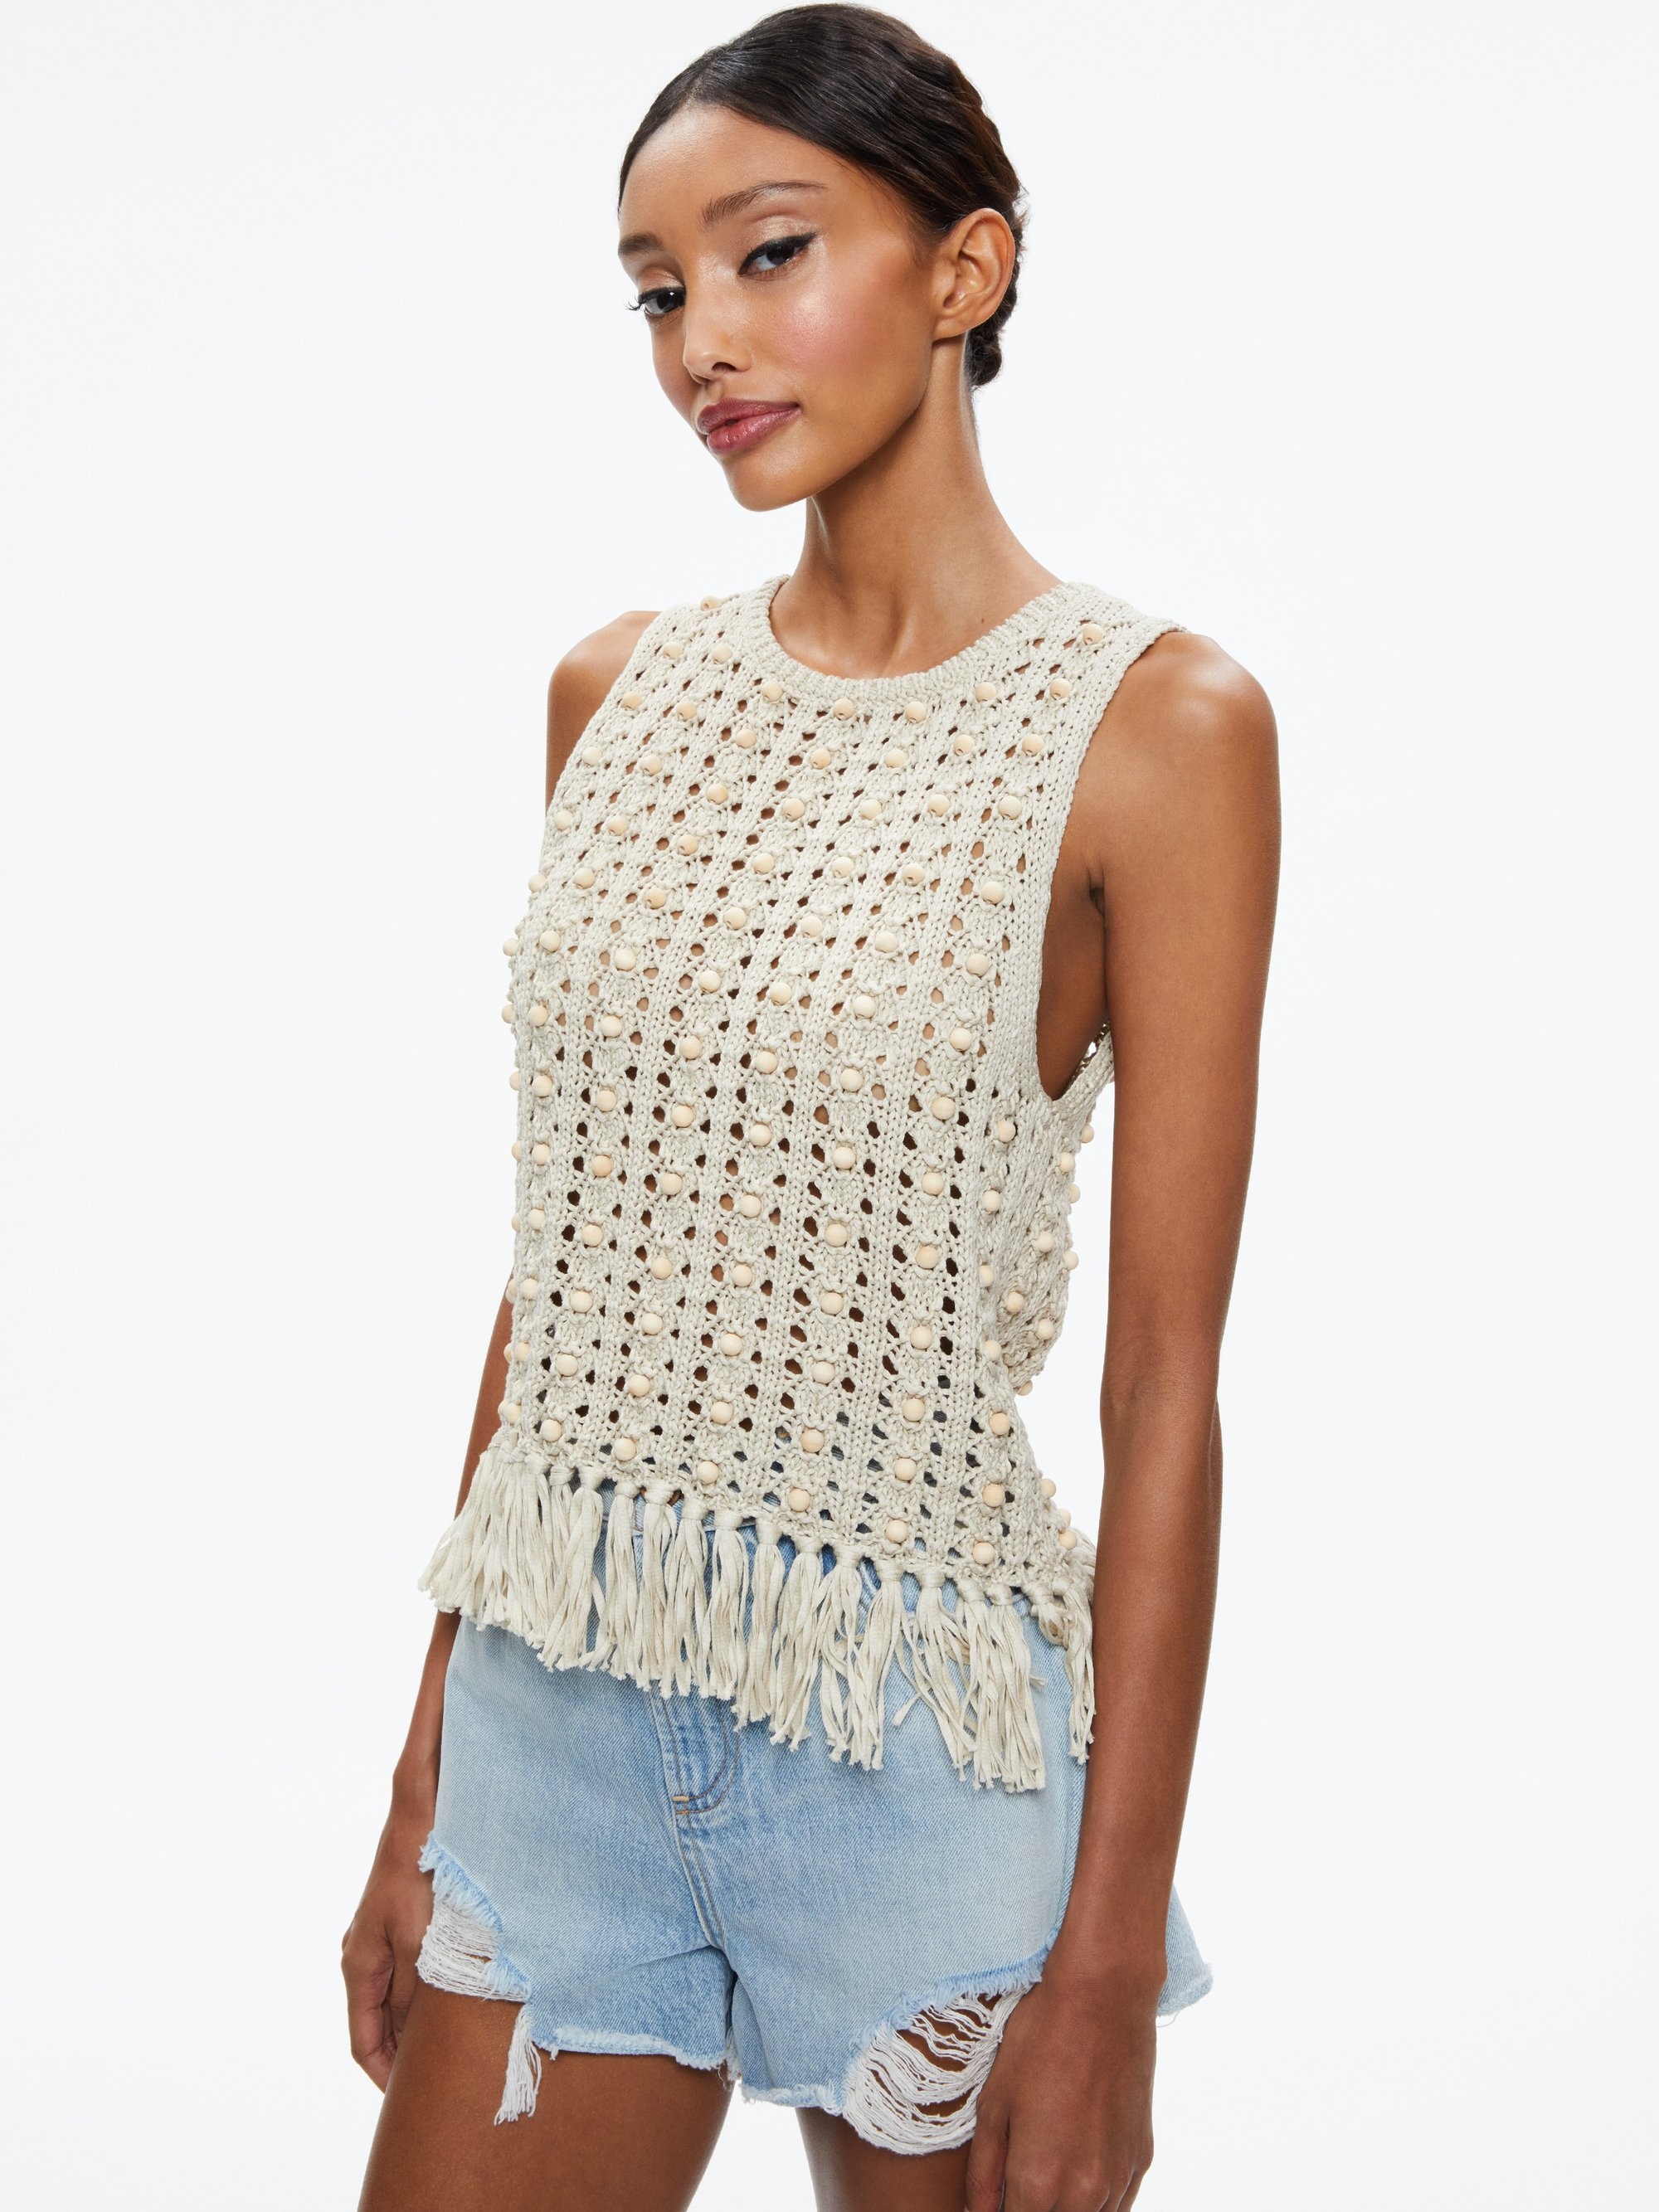 REVA TOP WITH WOODEN BEADS - 2